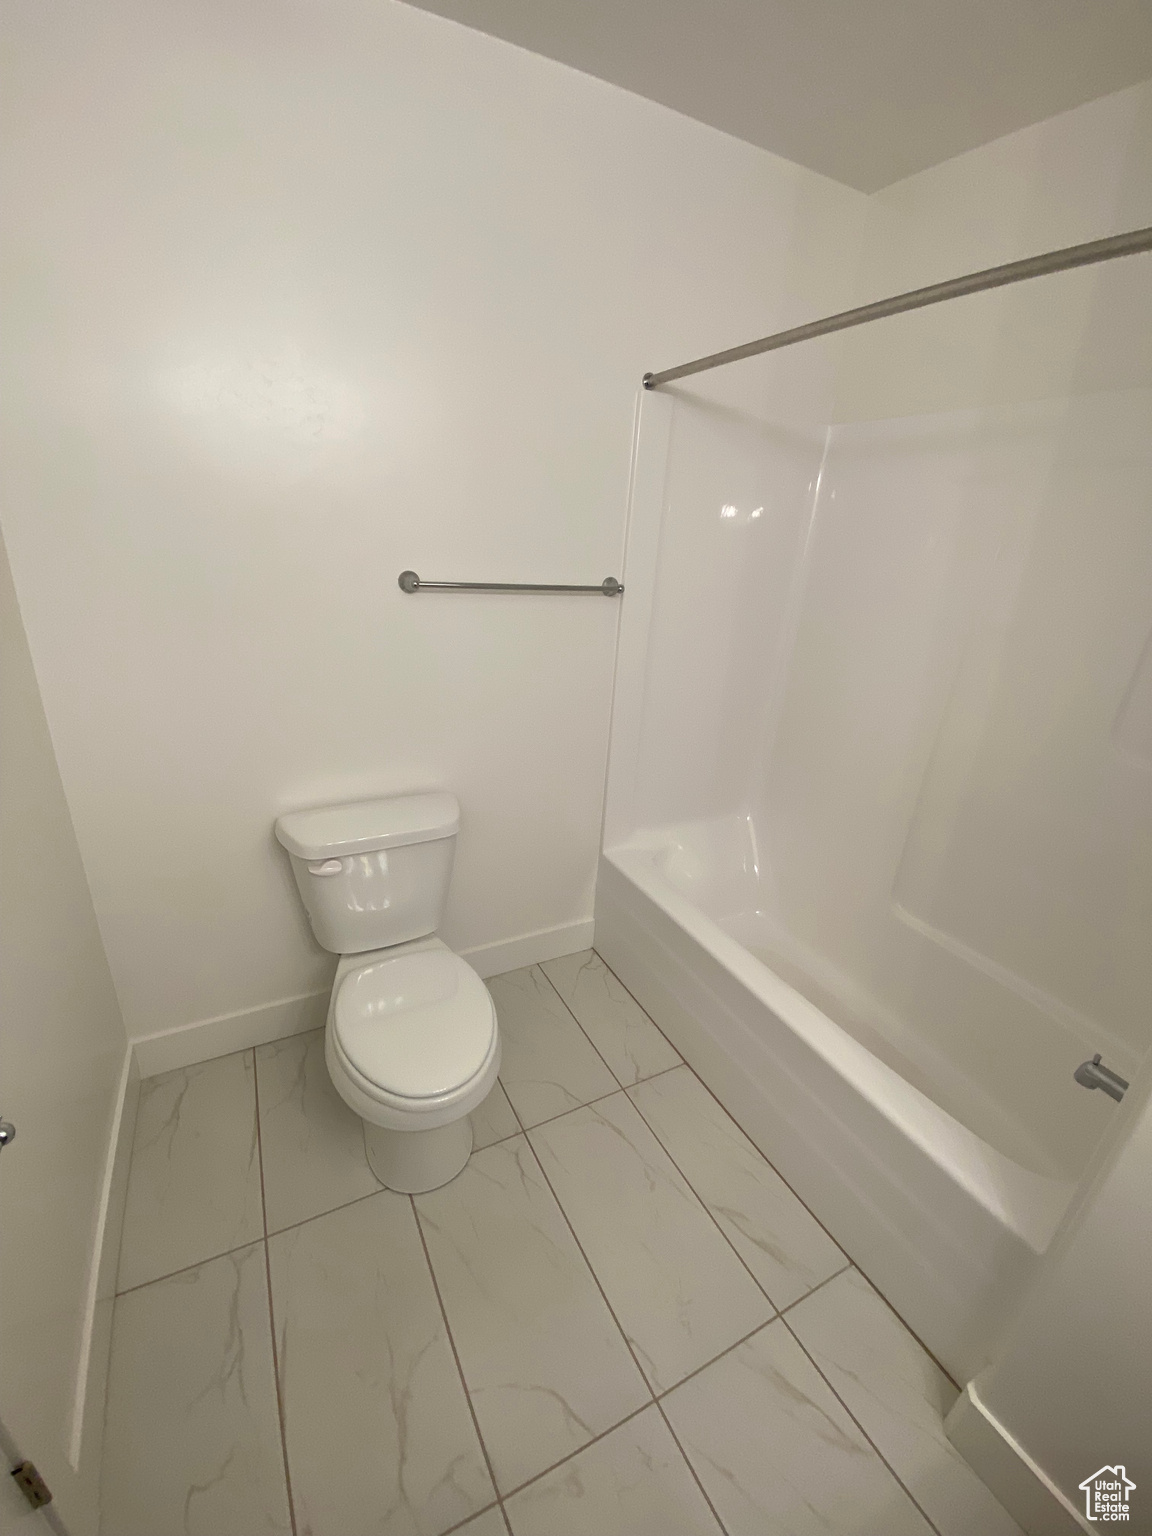 Bathroom with shower / bathing tub combination, tile floors, and toilet